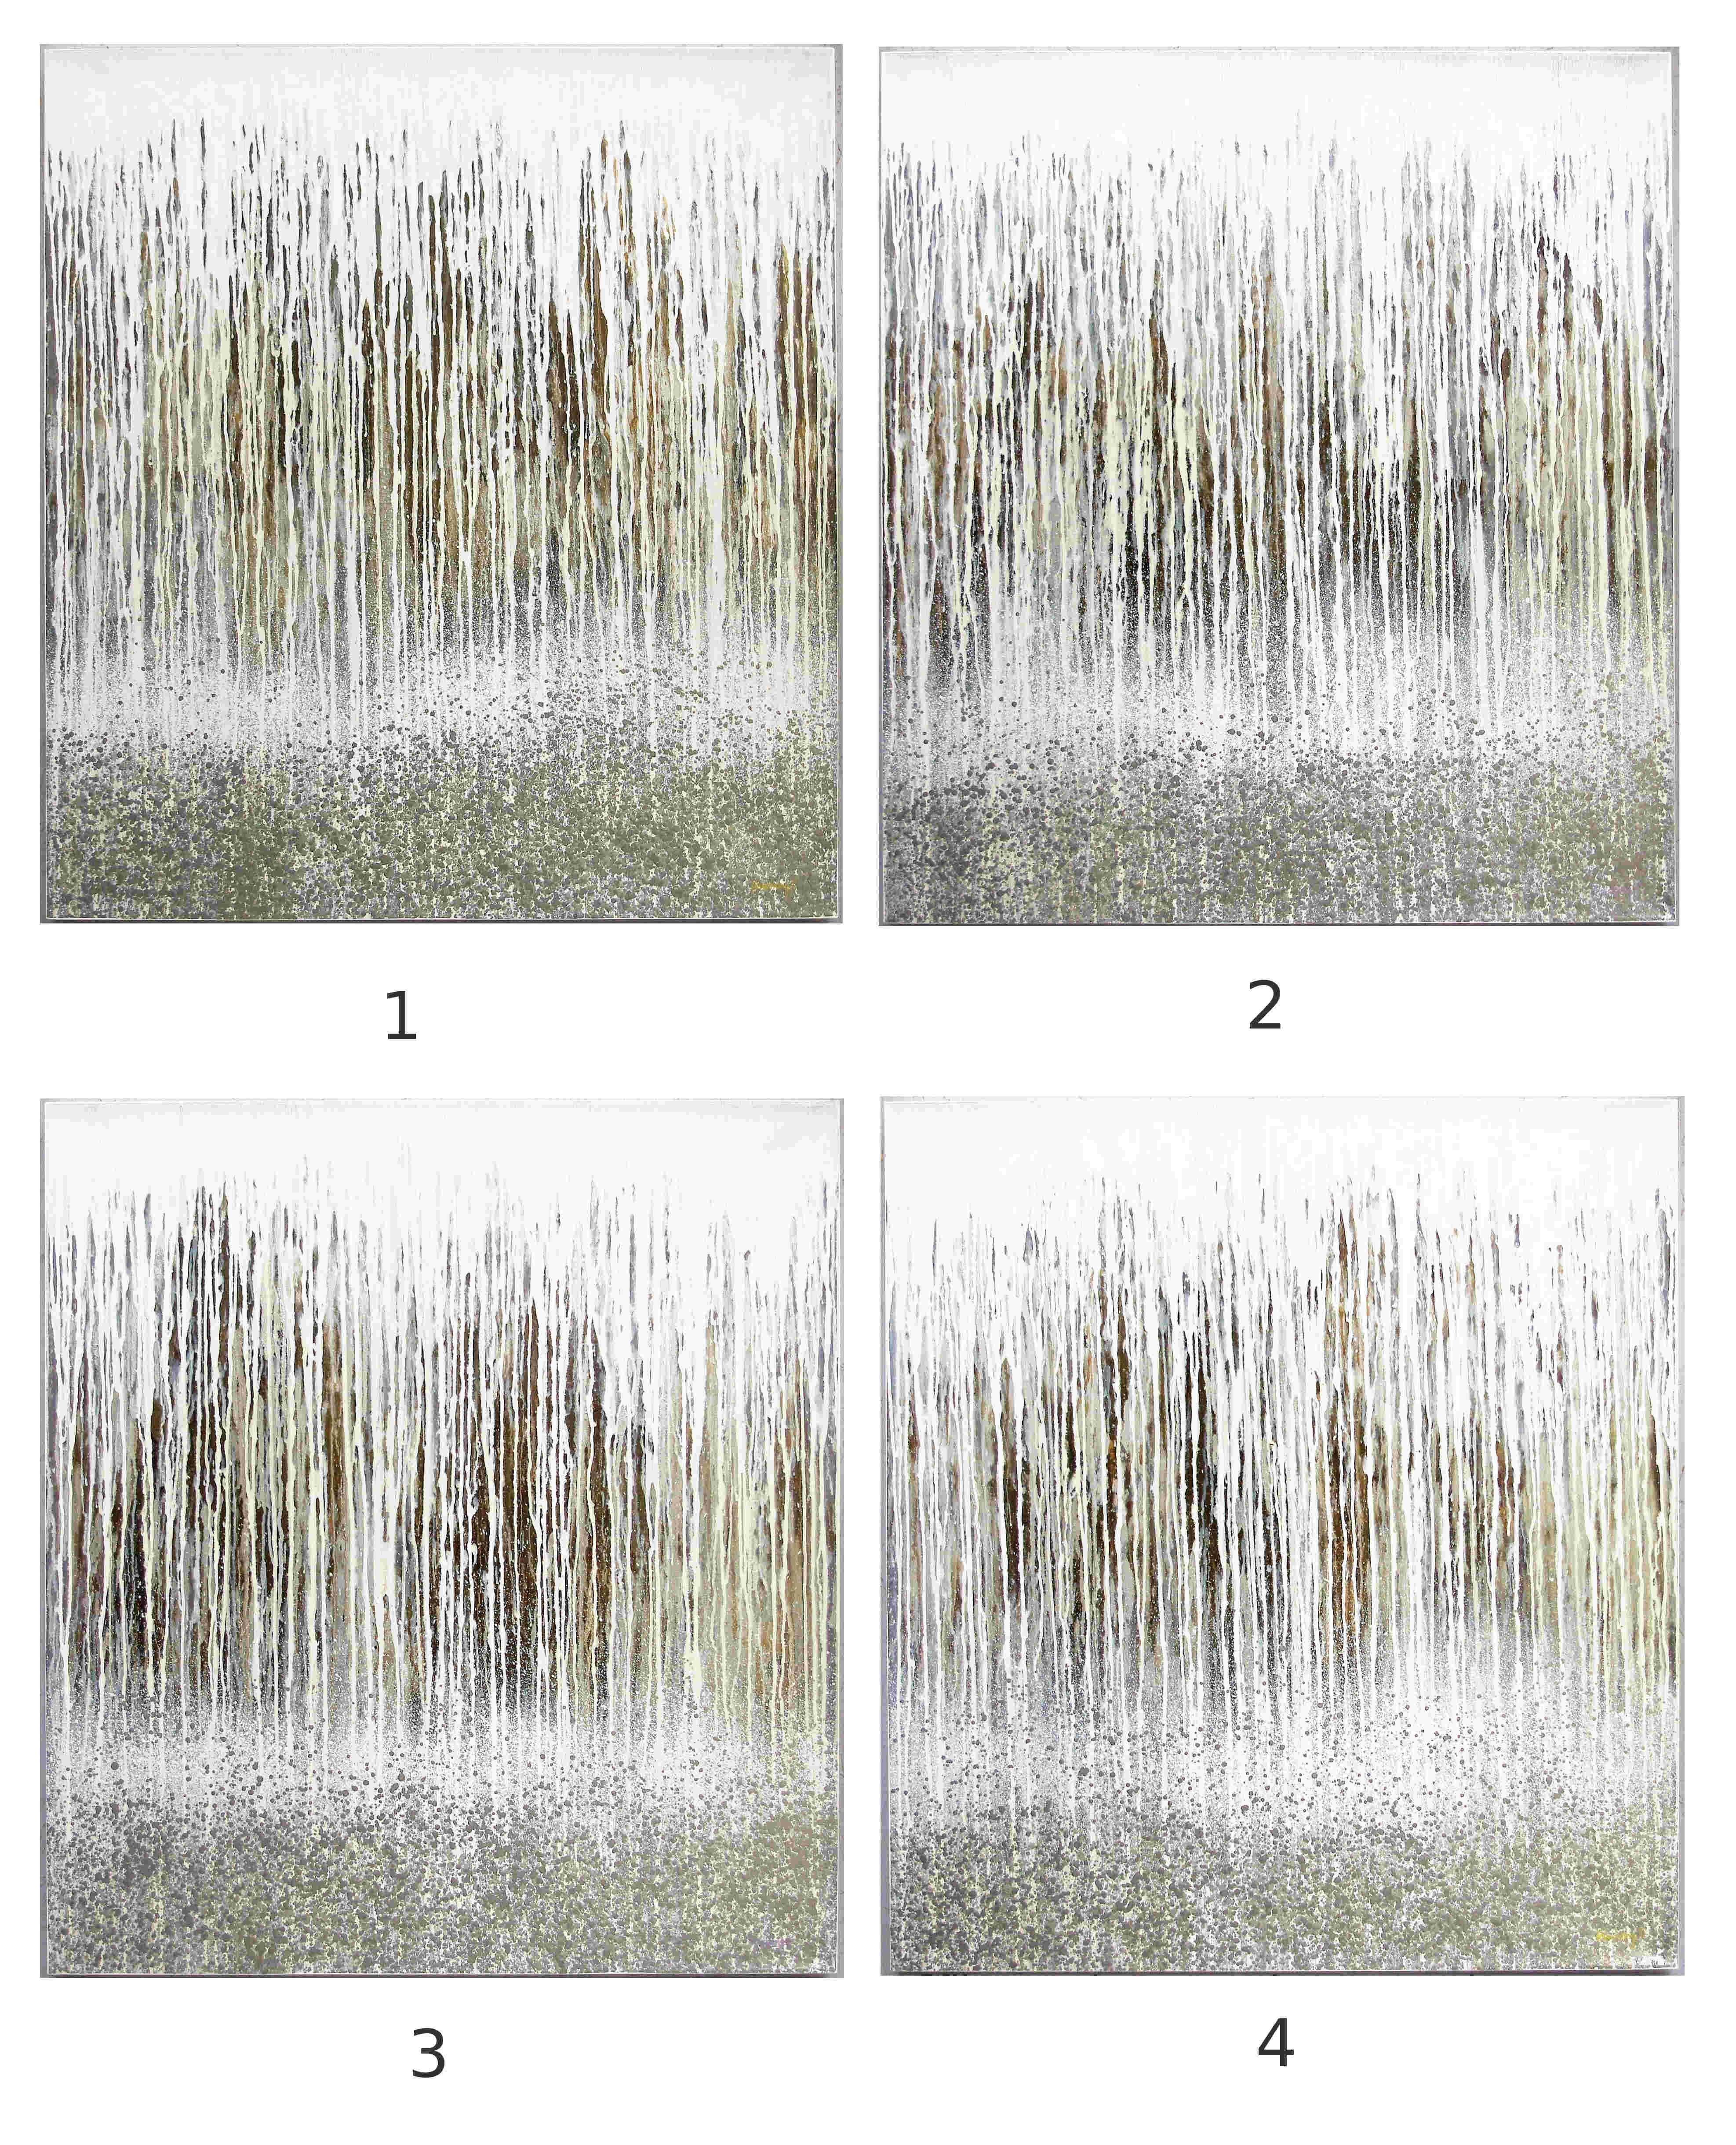 Four contemporary paintings titled Waterfall by Puchong T / The four paintings are all slightly different as shown in the images
Width: 43.5 inches / Height: 39.5 inches / Depth: 2 inches
4 available in Palm Springs
Order Reference # FABIOLTD PT3